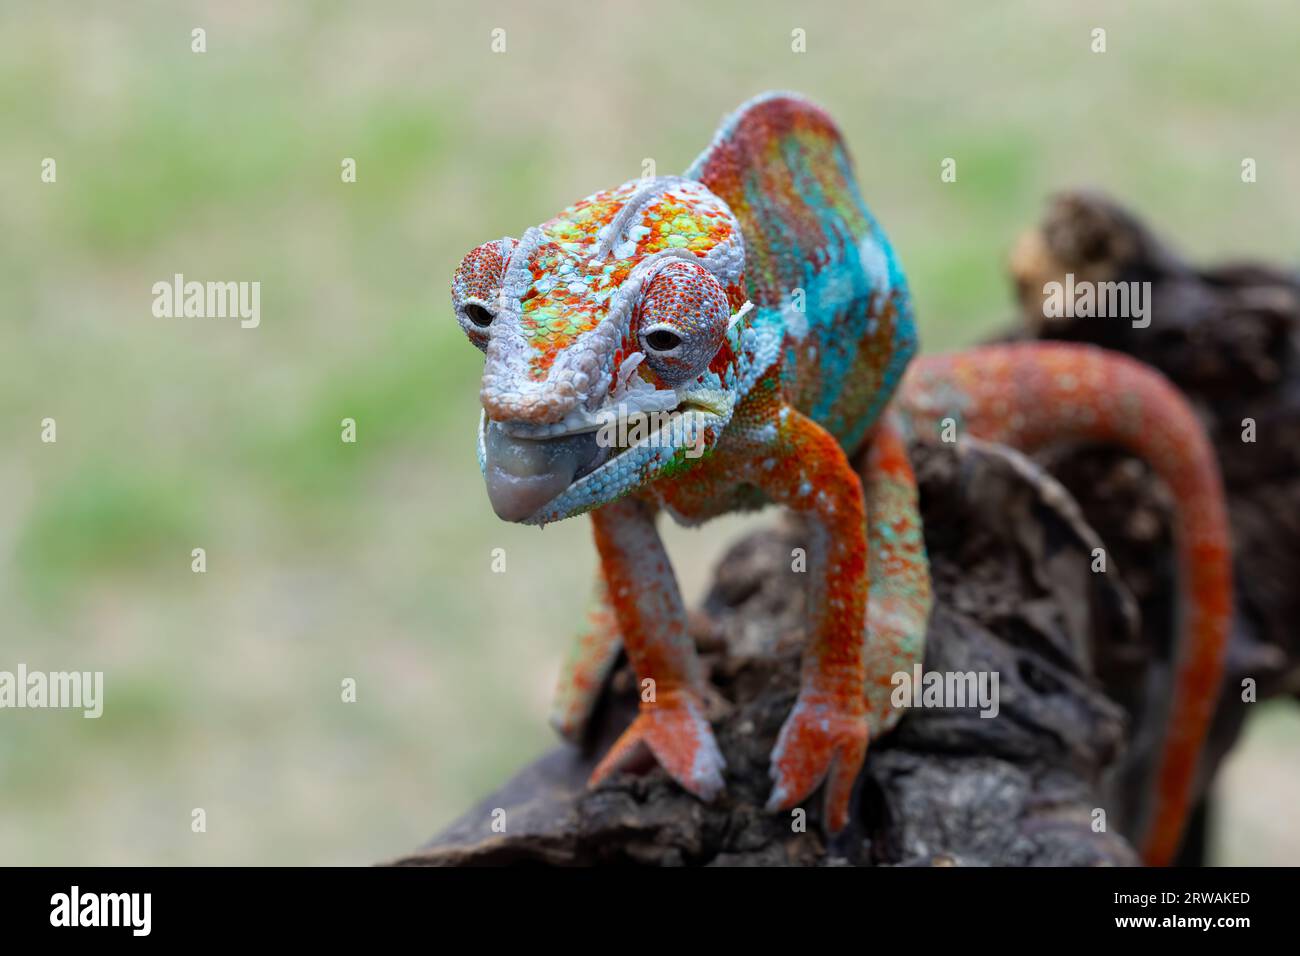 Panther chameleon walking along a branch, Indonesia Stock Photo